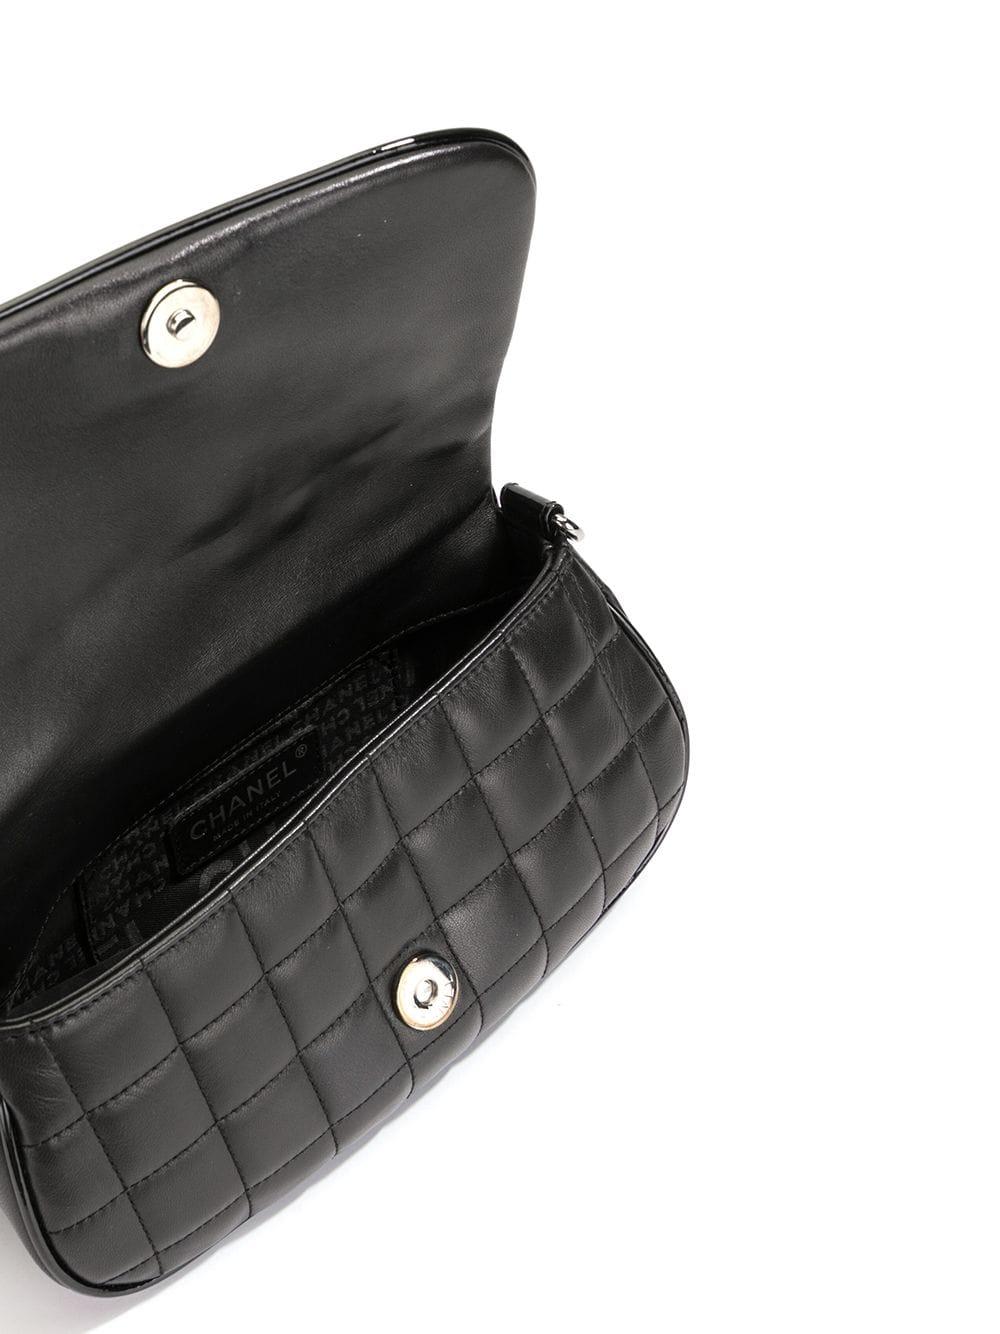 Chanel 2005 Cambon Quilted Lambskin Camellia No. 5 Flap Black Leather Bag For Sale 6